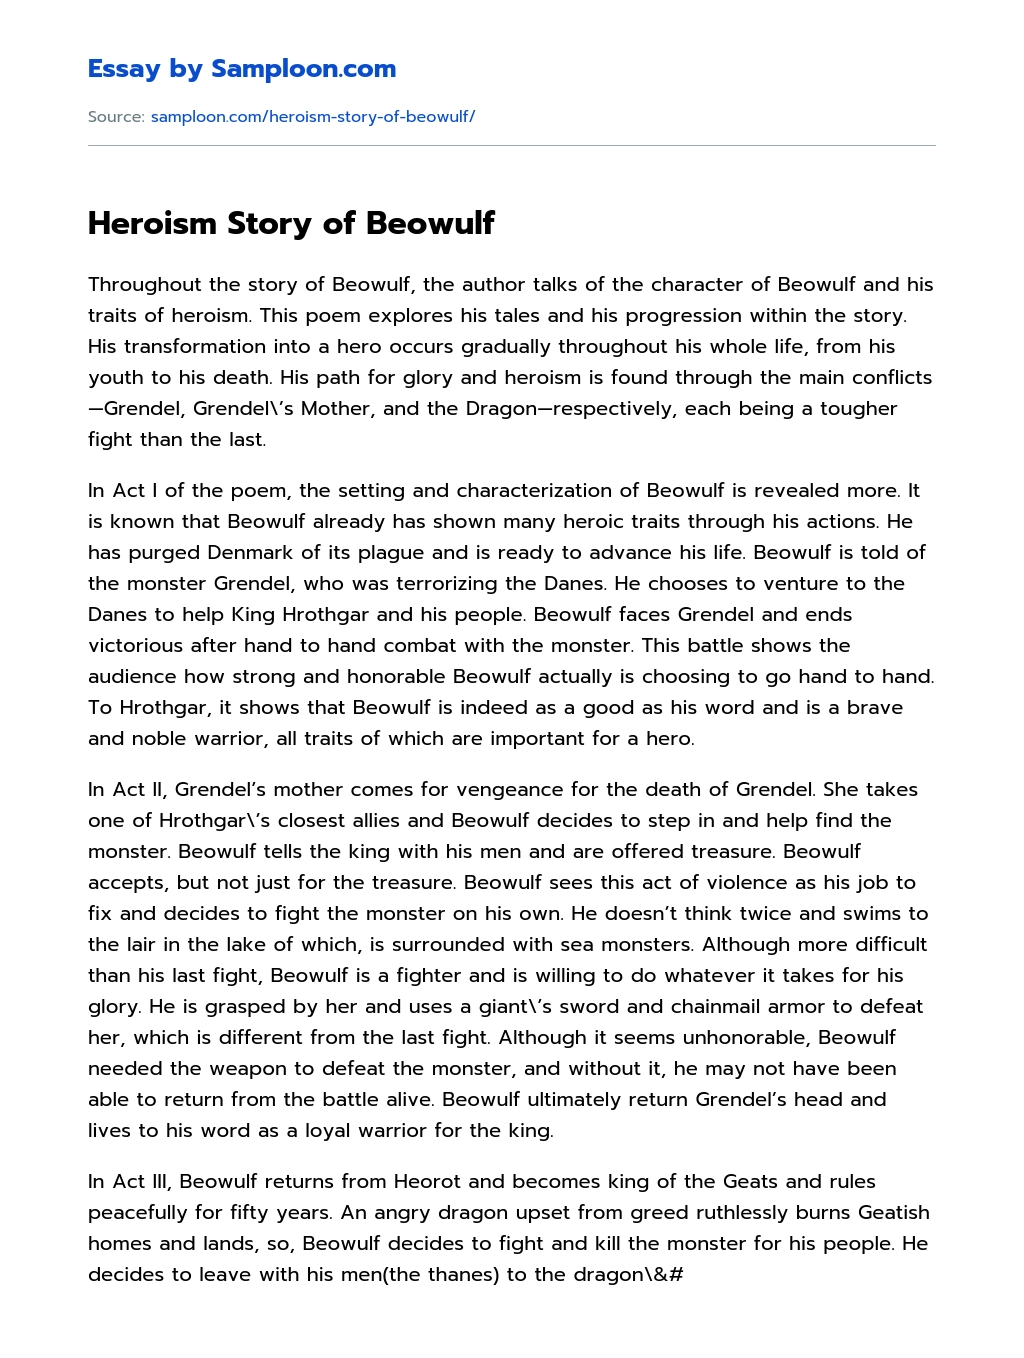 Heroism Story of Beowulf essay